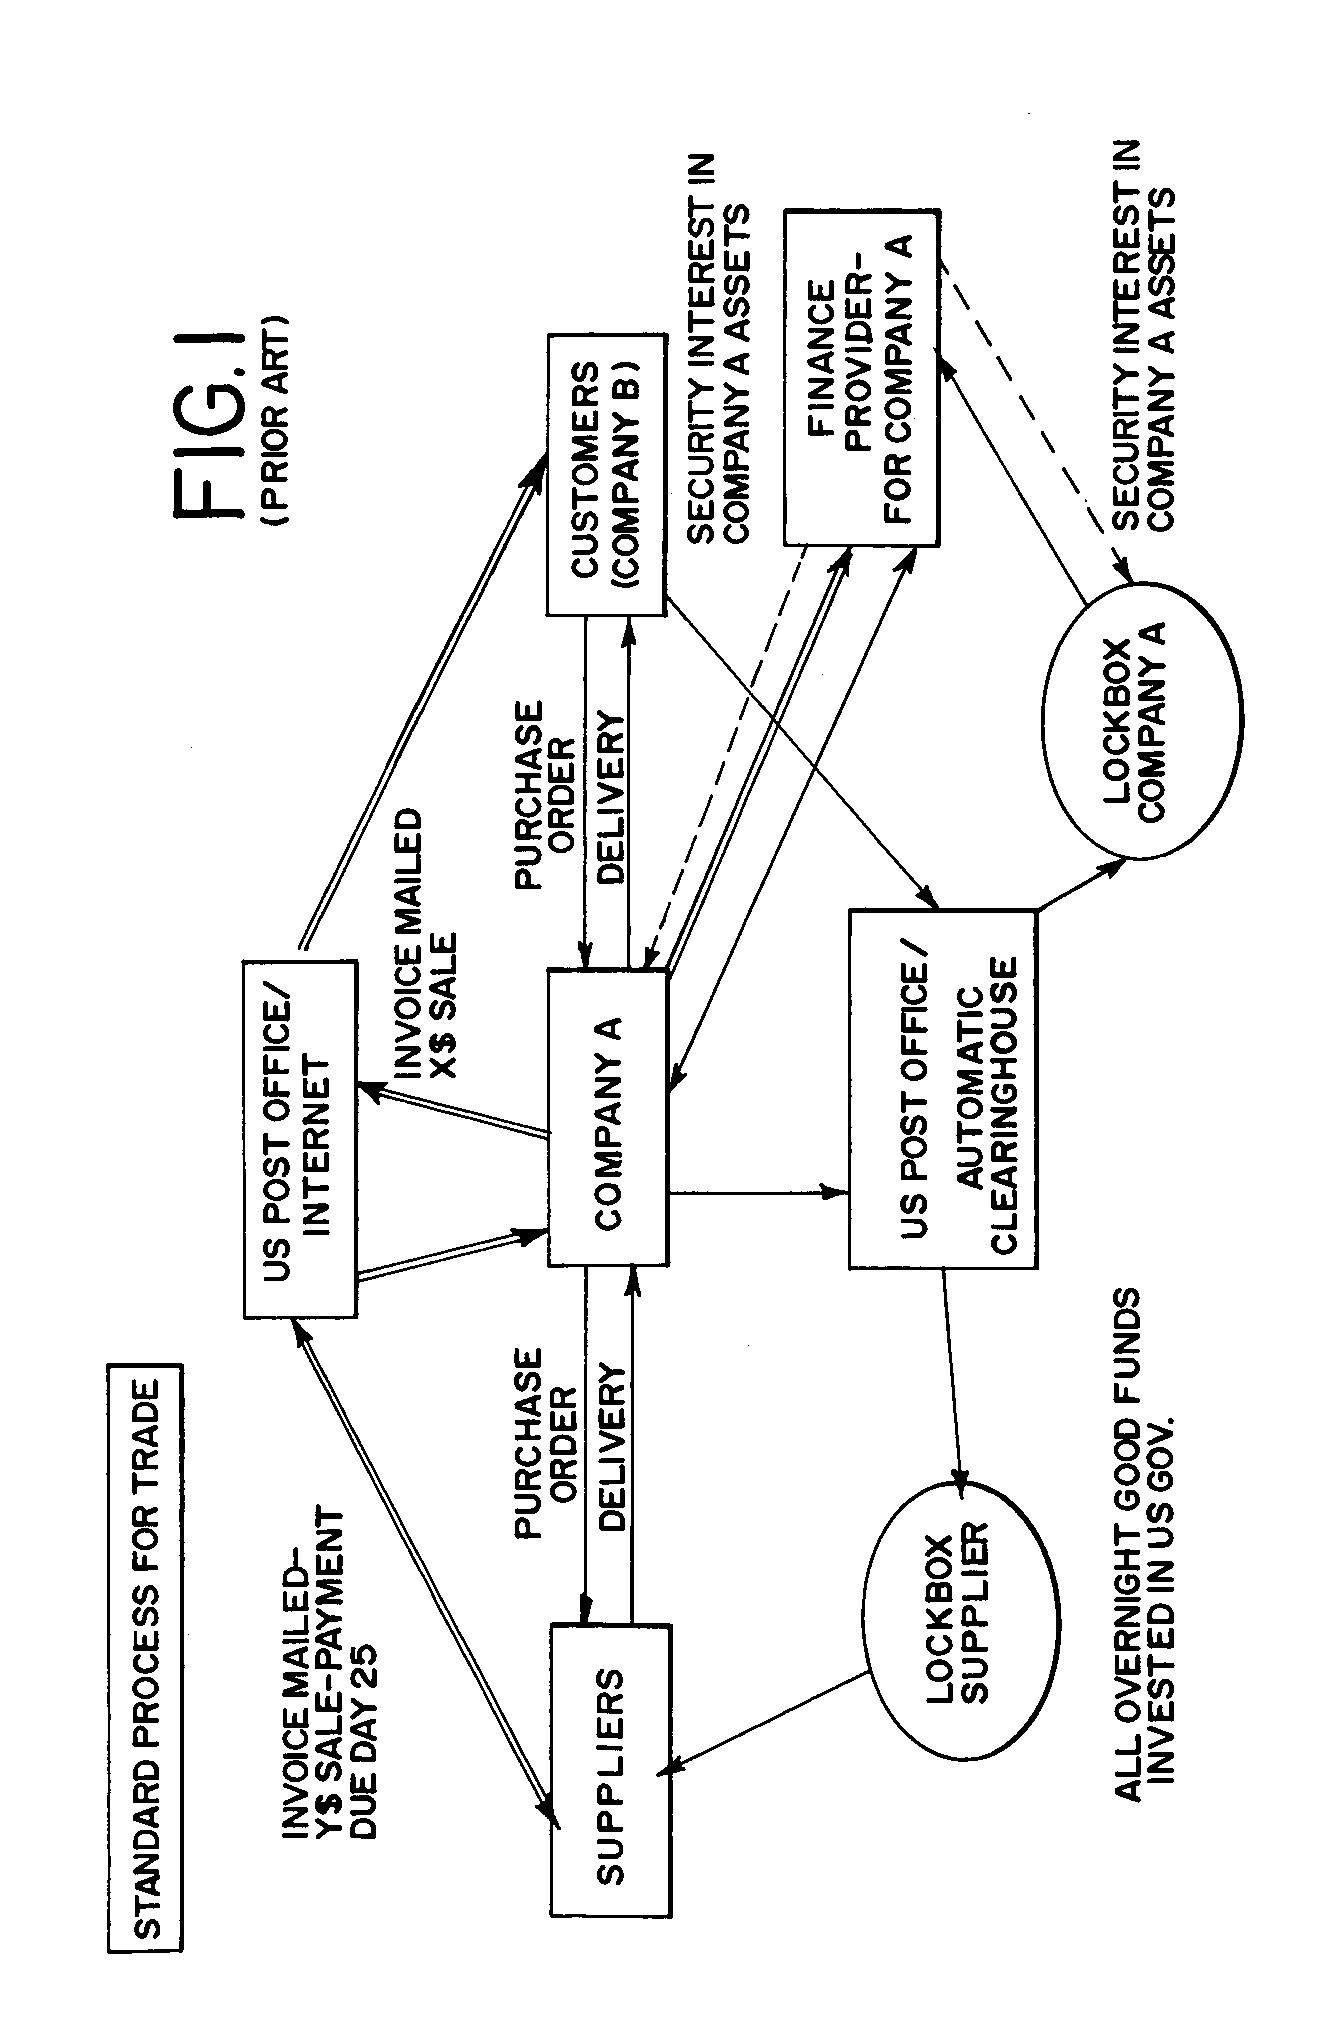 Trade receivable processing method and apparatus